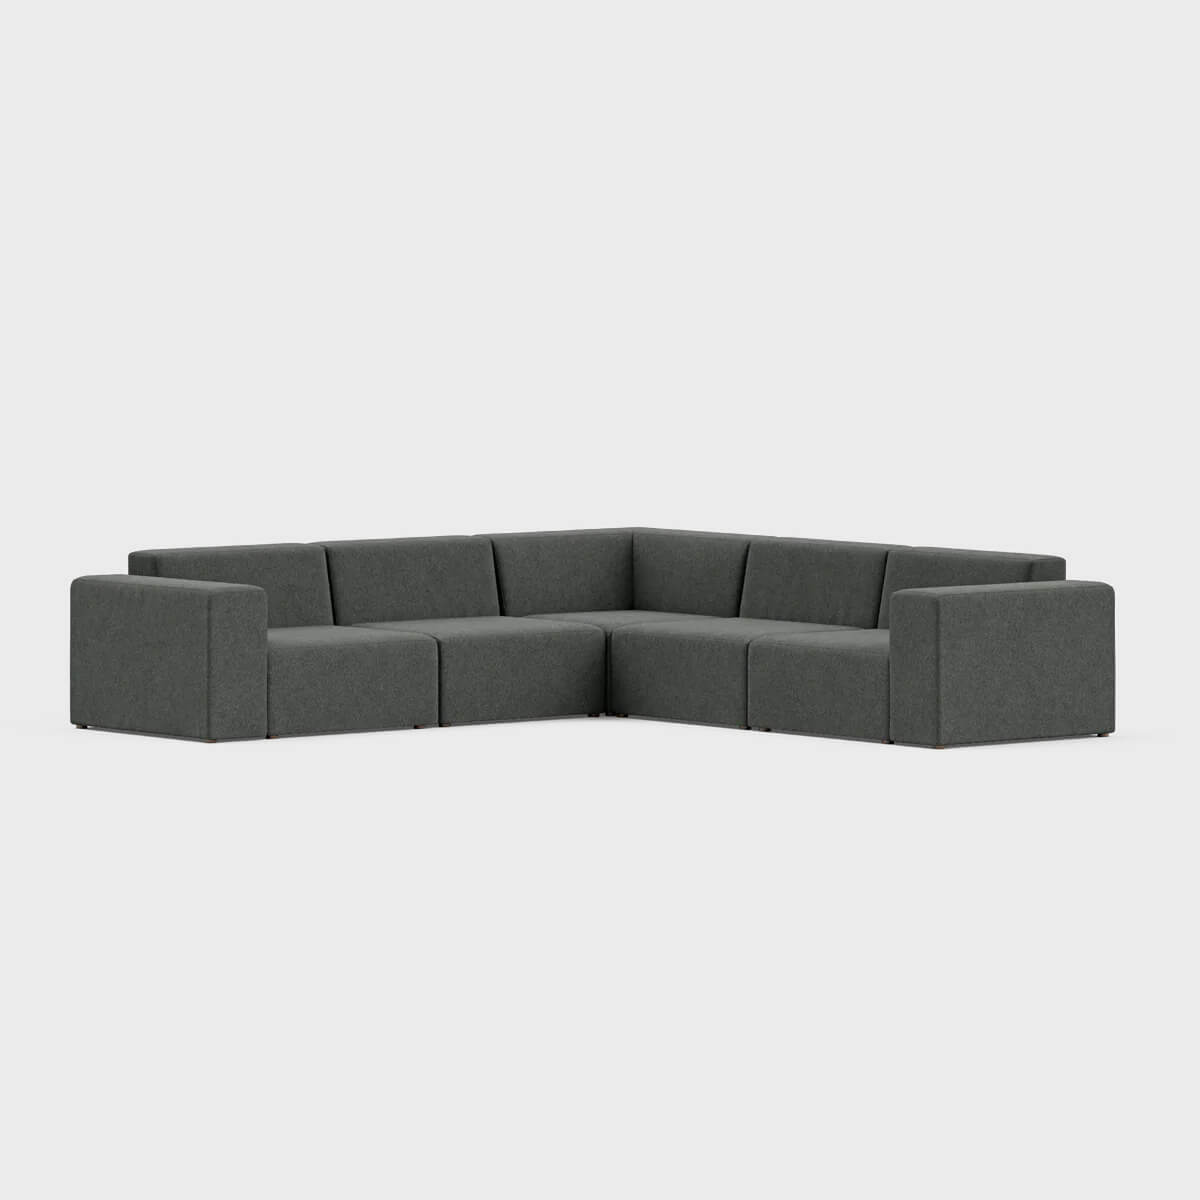 The Floyd Five-Piece Form Sectional